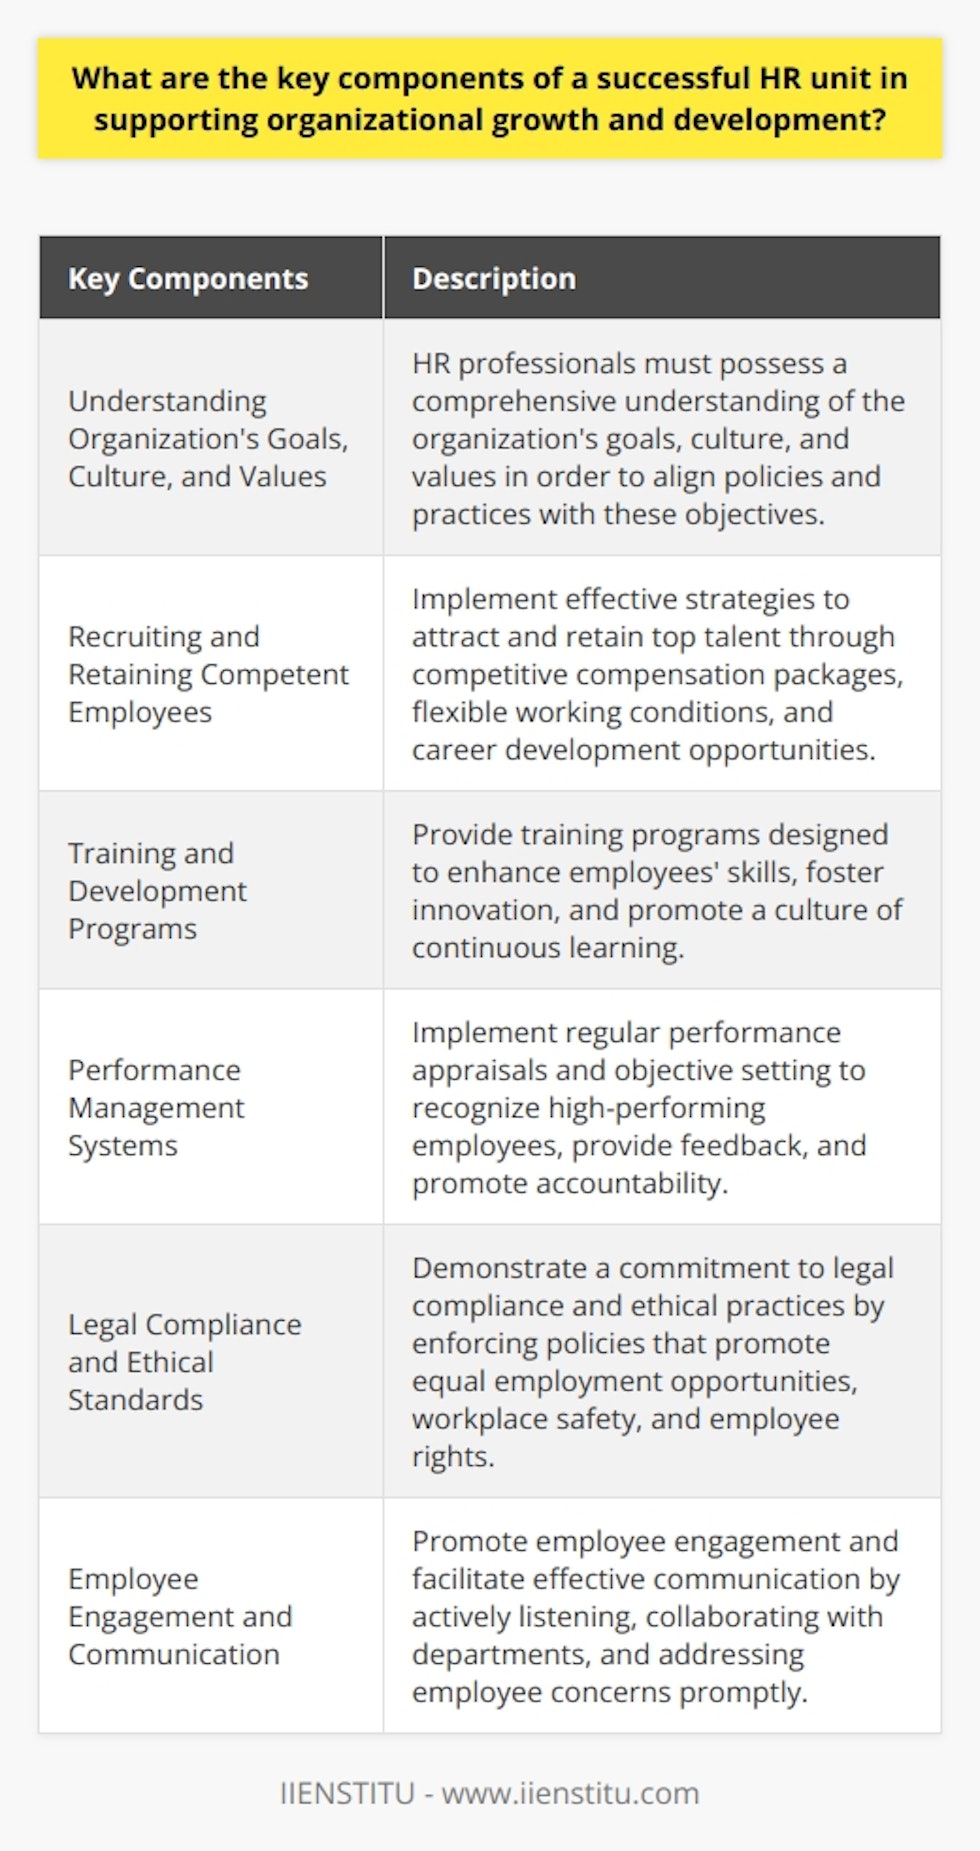 A successful HR unit plays a vital role in supporting organizational growth and development. To achieve this, HR professionals must possess a comprehensive understanding of the organization's goals, culture, and values. By aligning their policies and practices with these objectives, they facilitate a more cohesive and productive work environment.Recruiting and retaining competent employees is crucial for organizational success. A strong HR unit should implement effective strategies that attract top talent and provide them with reasons to stay. This can be achieved through competitive compensation packages, flexible working conditions, and opportunities for career development.One of the key responsibilities of HR is to provide training and development programs for employees. These programs should be designed to enhance their skills and competencies, foster innovation, and promote a culture of continuous learning. By investing in employees' growth, HR professionals contribute to increased productivity and organizational development.Effective performance management systems are another essential component of a successful HR unit. Through regular performance appraisals and objective setting, HR professionals can recognize high-performing employees and provide feedback to help them improve. This promotes a culture of accountability and ensures that employees understand and work towards achieving the company's strategic objectives.Compliance with laws and ethical standards is of utmost importance for any HR unit. HR professionals should be well-versed in relevant legislation and enforce policies that promote equal employment opportunities, workplace safety, and employees' rights. By demonstrating a commitment to legal compliance and ethical practices, HR professionals contribute to a positive organizational culture and enhance the organization's reputation.Lastly, fostering employee engagement and facilitating effective communication are integral to the success of an HR unit. By actively listening to employees, collaborating with various departments, and addressing employee concerns promptly, HR professionals contribute to a more cohesive and dynamic work environment. This ultimately supports the organization's growth and development.In conclusion, a successful HR unit plays a crucial role in supporting organizational growth and development. By understanding organizational goals and culture, implementing effective recruitment and retention strategies, providing quality training and development programs, implementing performance management systems, ensuring legal compliance and ethical standards, and fostering employee engagement and communication, HR professionals contribute to the overall success of the organization.